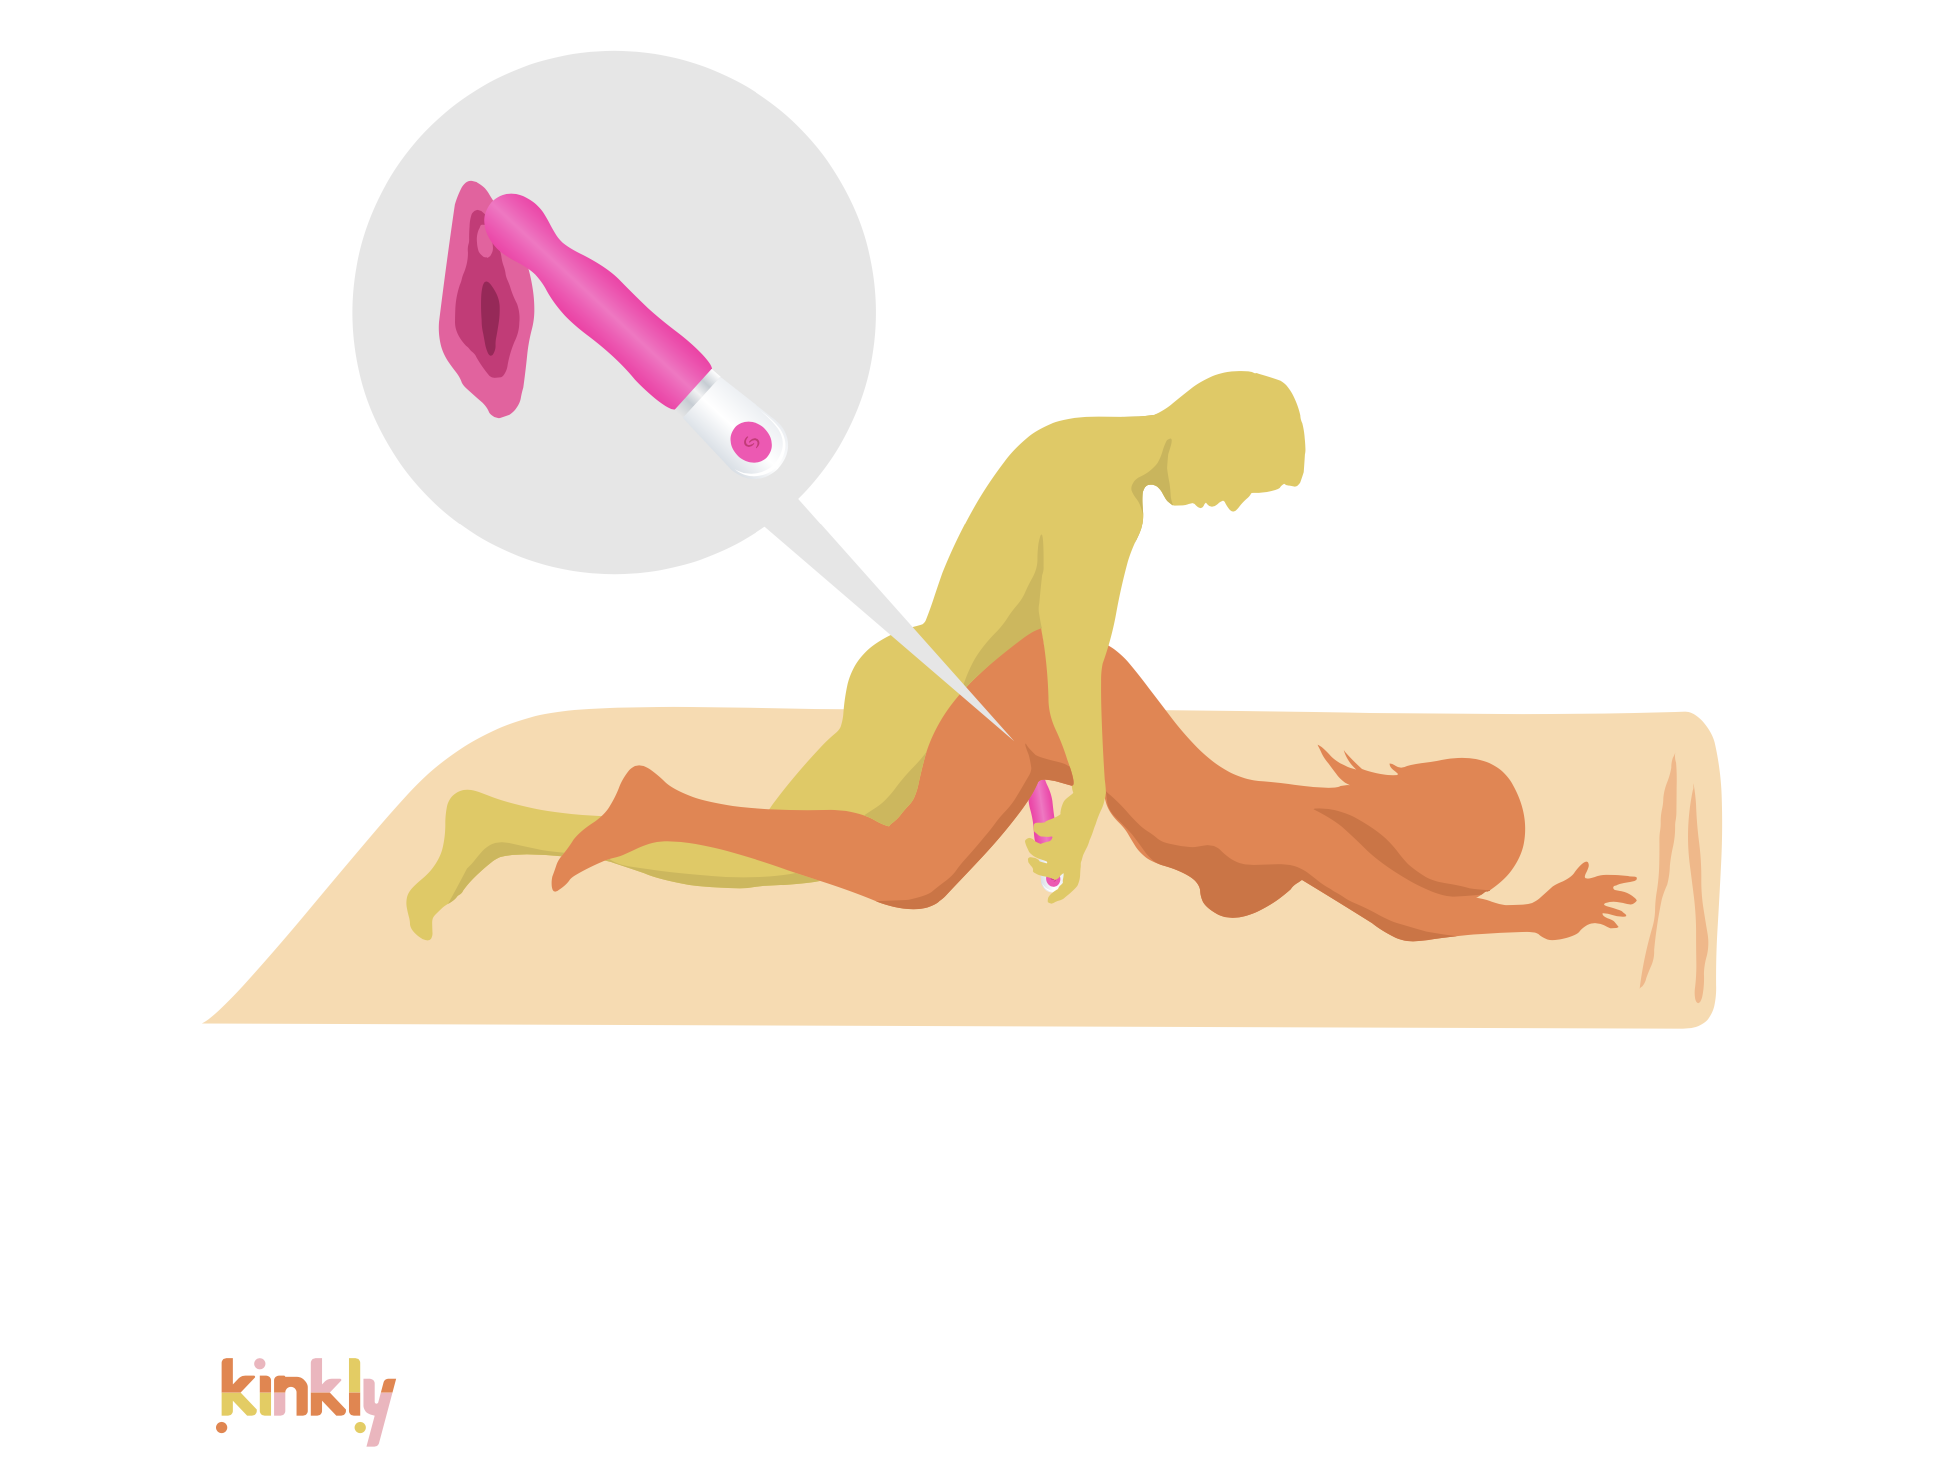 Flat Doggy Style Position. Doggy style but receiving partner is lying flat with their bum in the air. The penetrating partner holds a vibrator s in their hand, reaching around to use it on the receiving partner's clitoris.